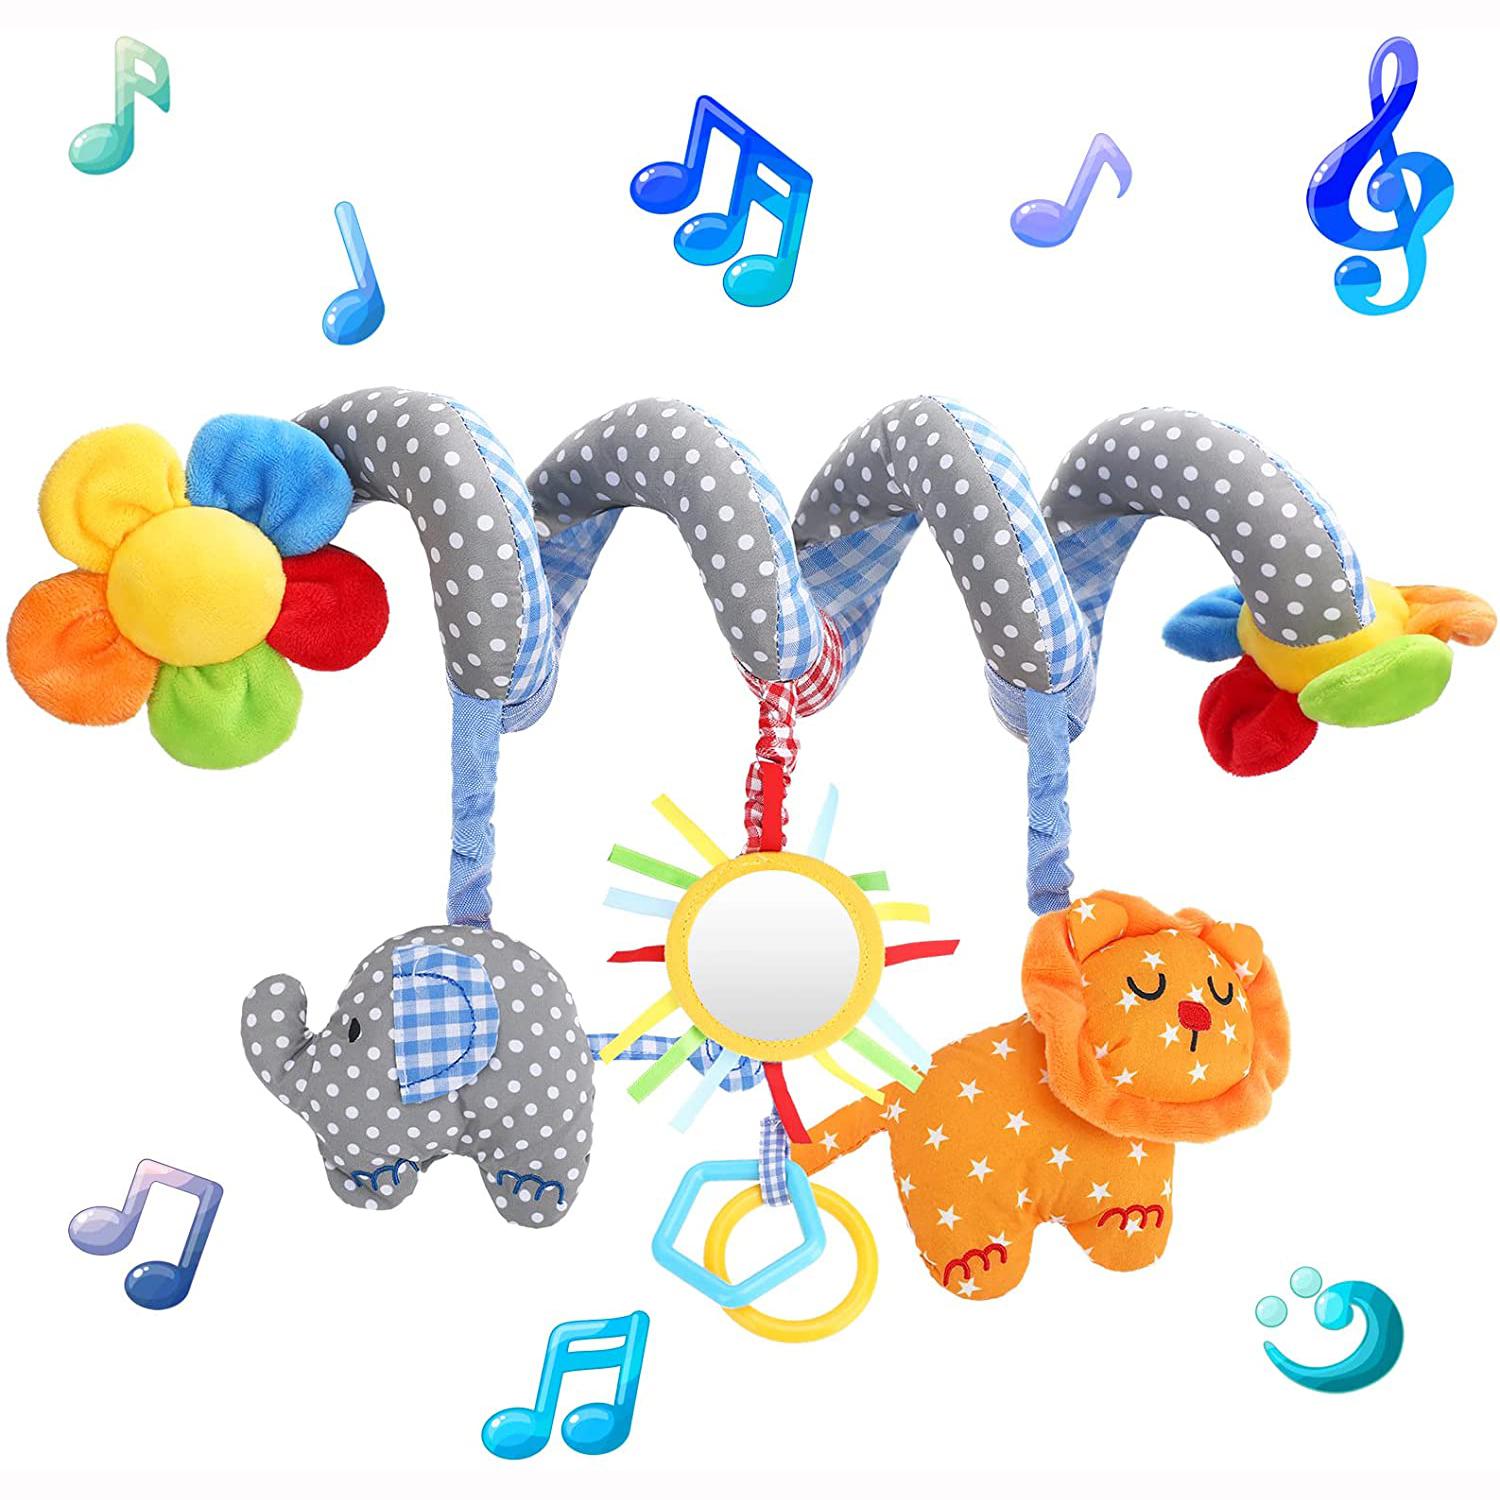 FourAll-Toys, Kids & Baby Car Seat Toys Stroller Spiral Toys for Baby Girl Elephant Crib Hanging Spiral Plush Toy for Stroller Car Travel Activity